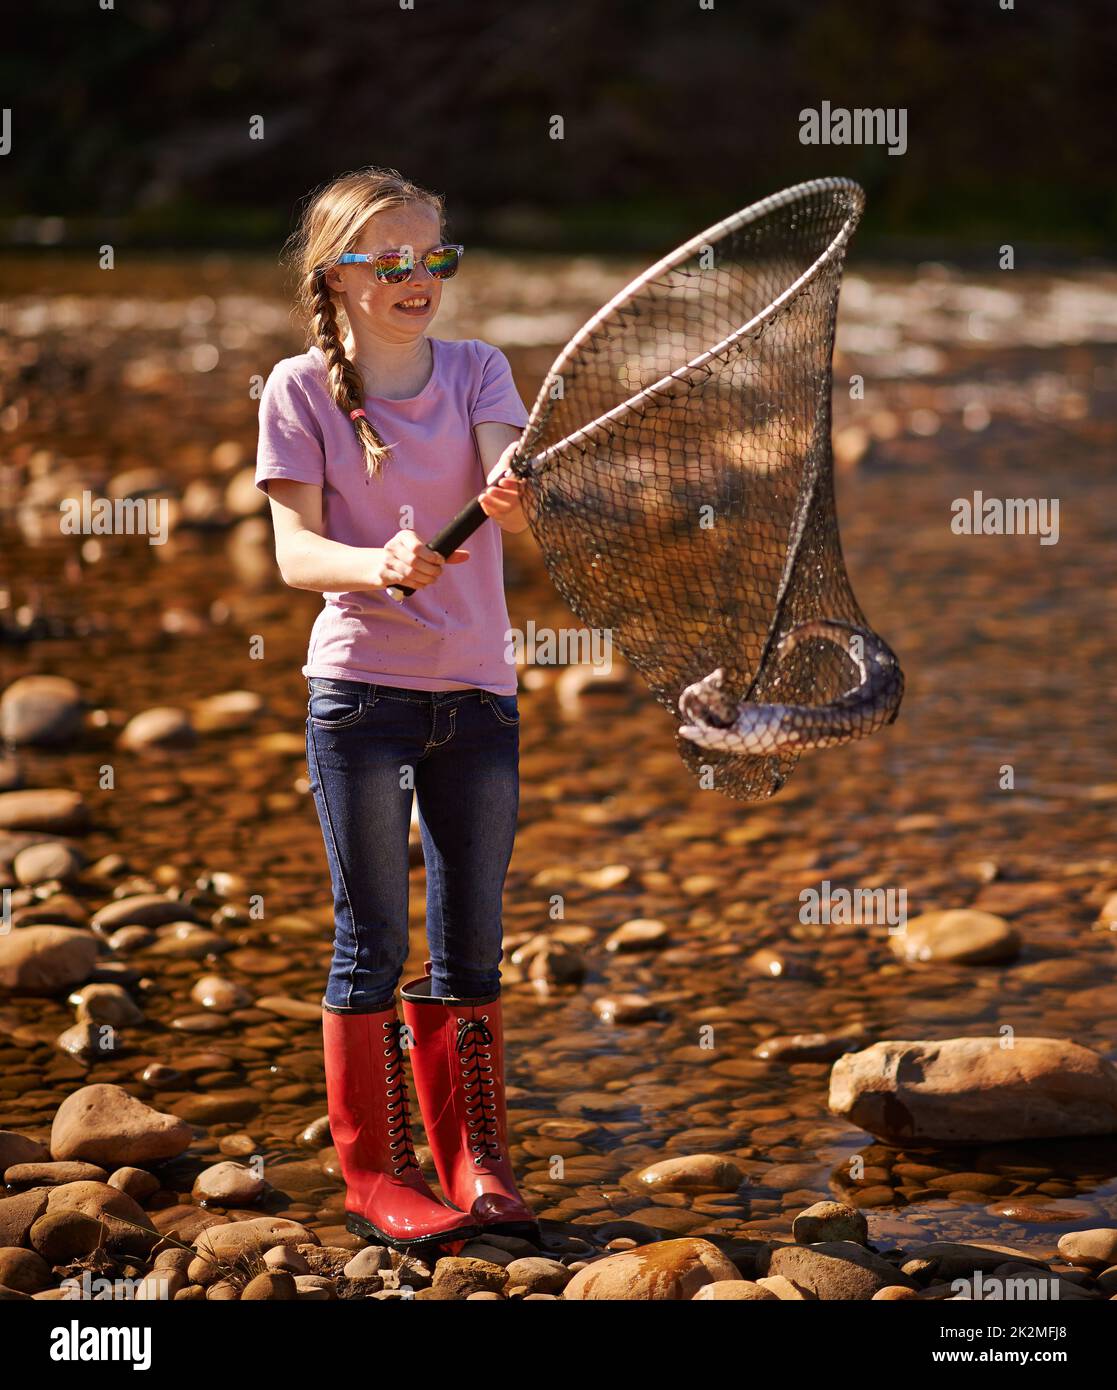 I got one. Shot of a young girl holding a fishing net with a fish in it. Stock Photo